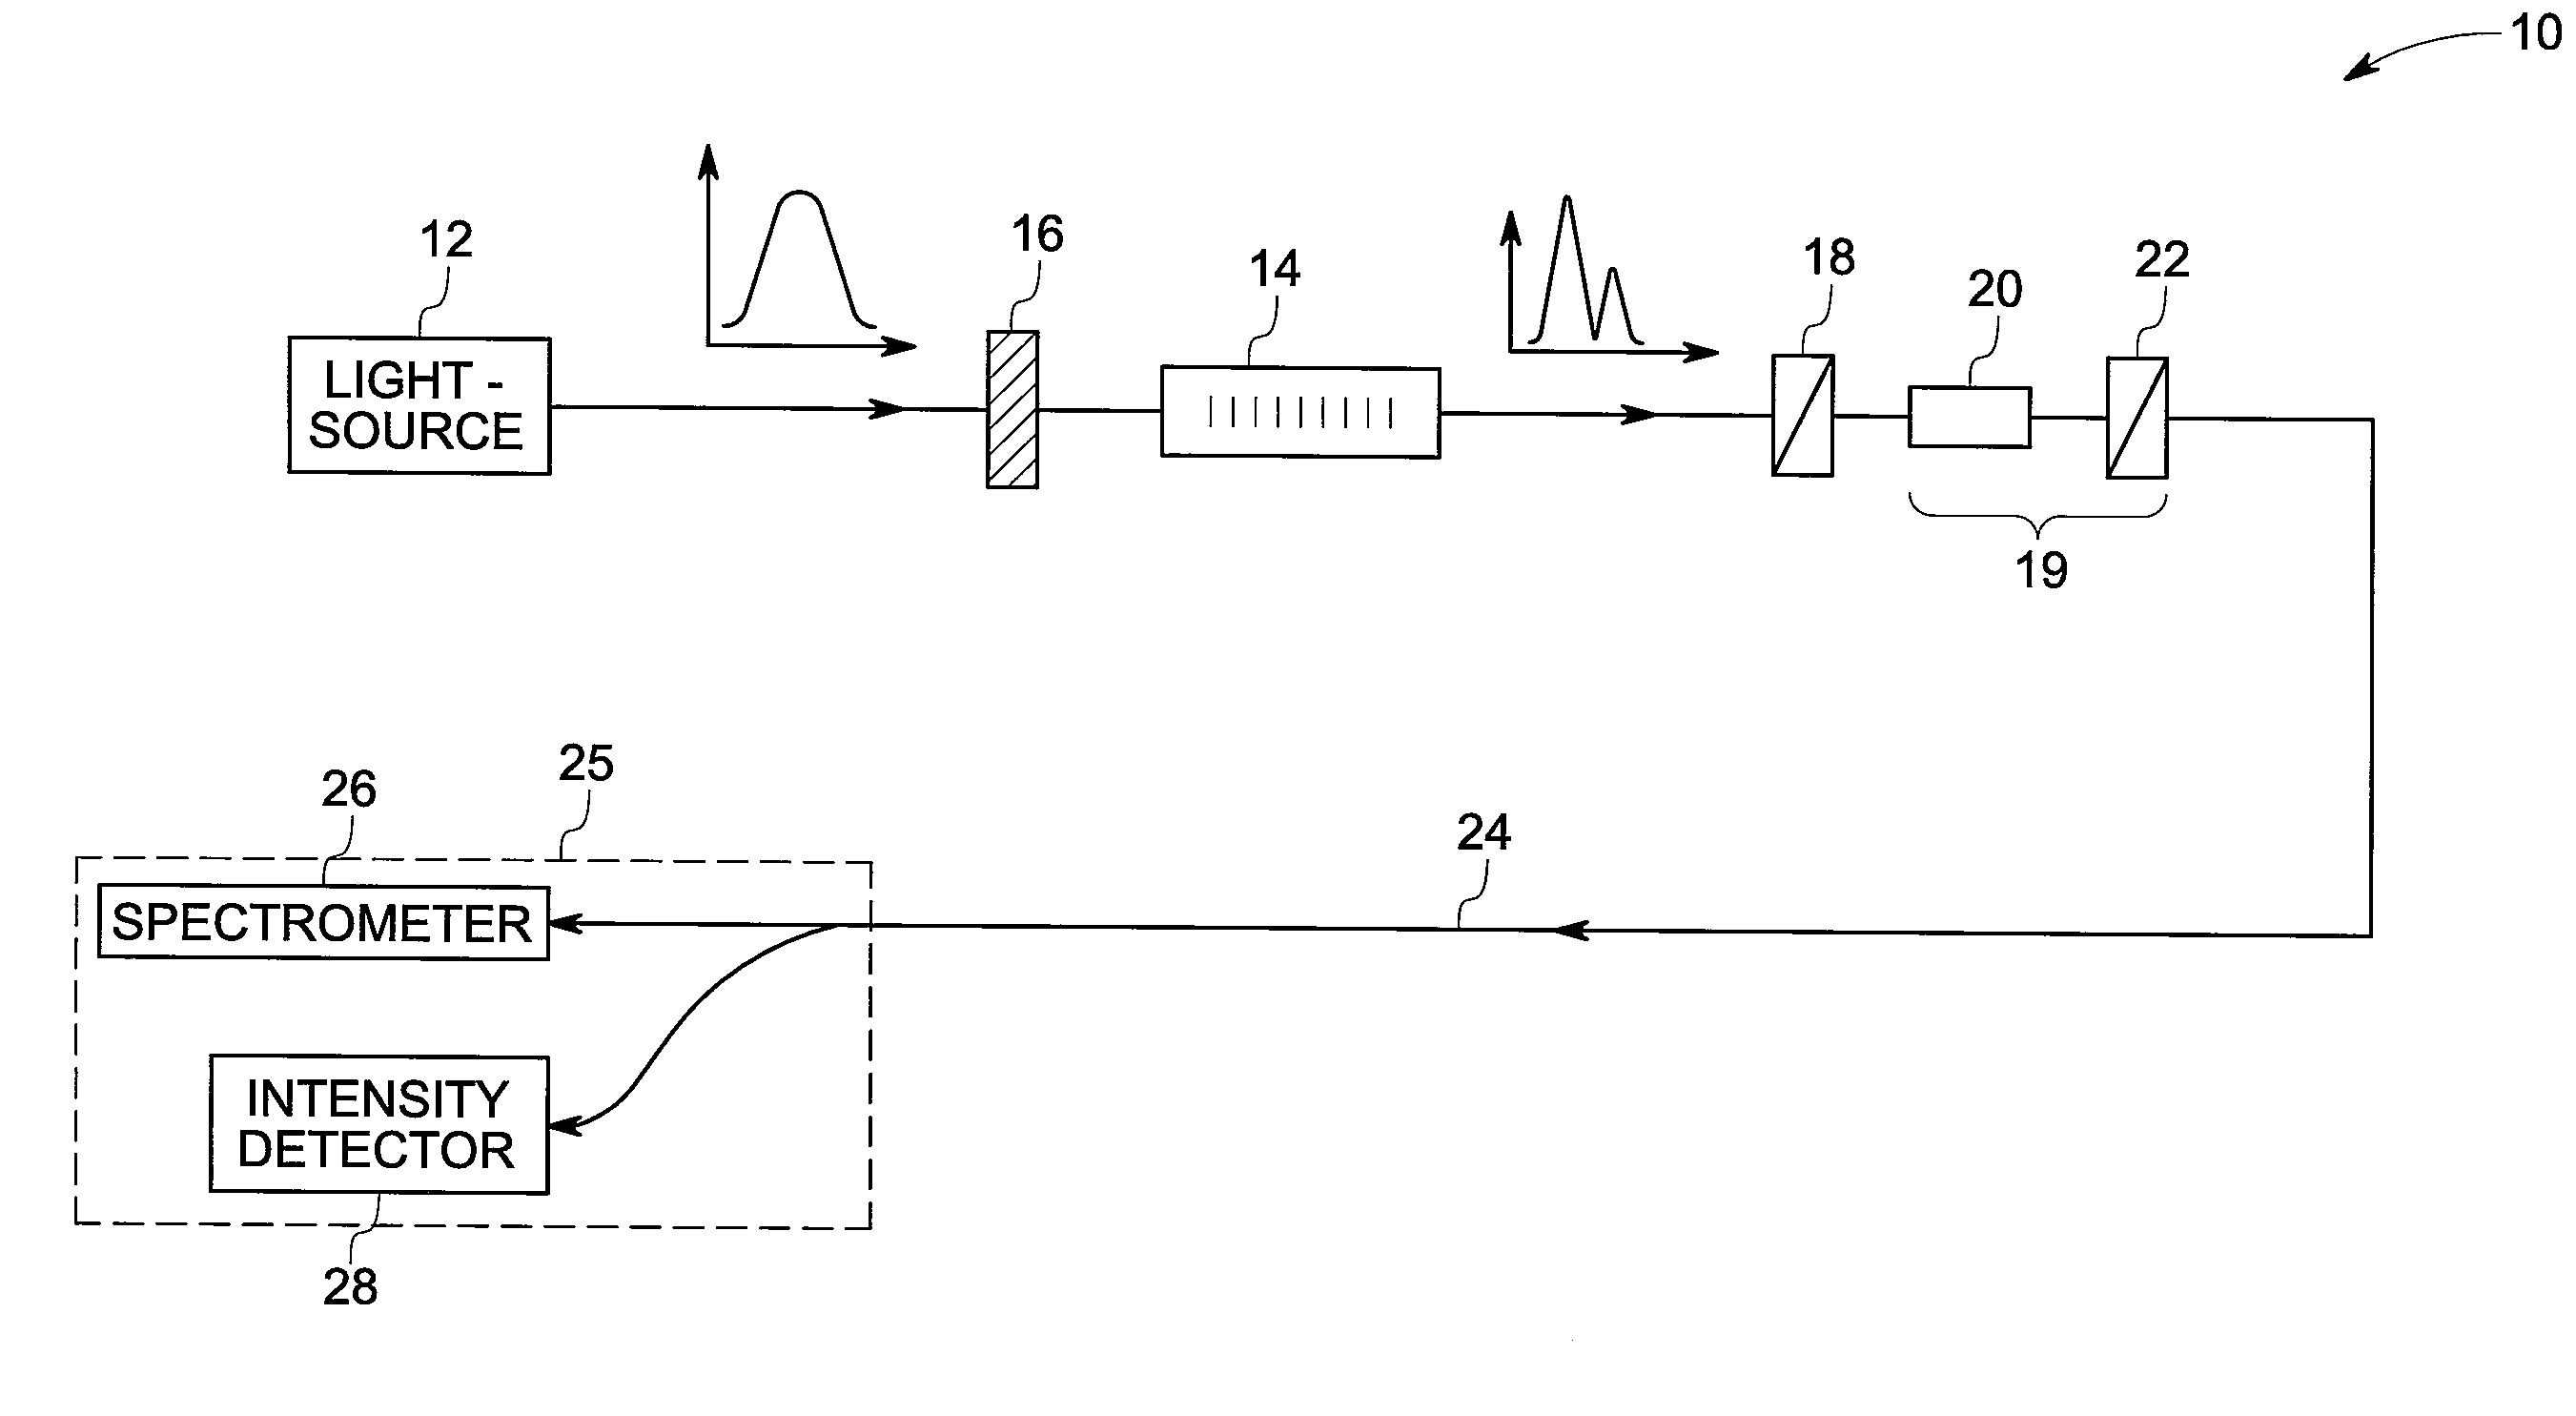 System and method for integrated measurement using optical sensors